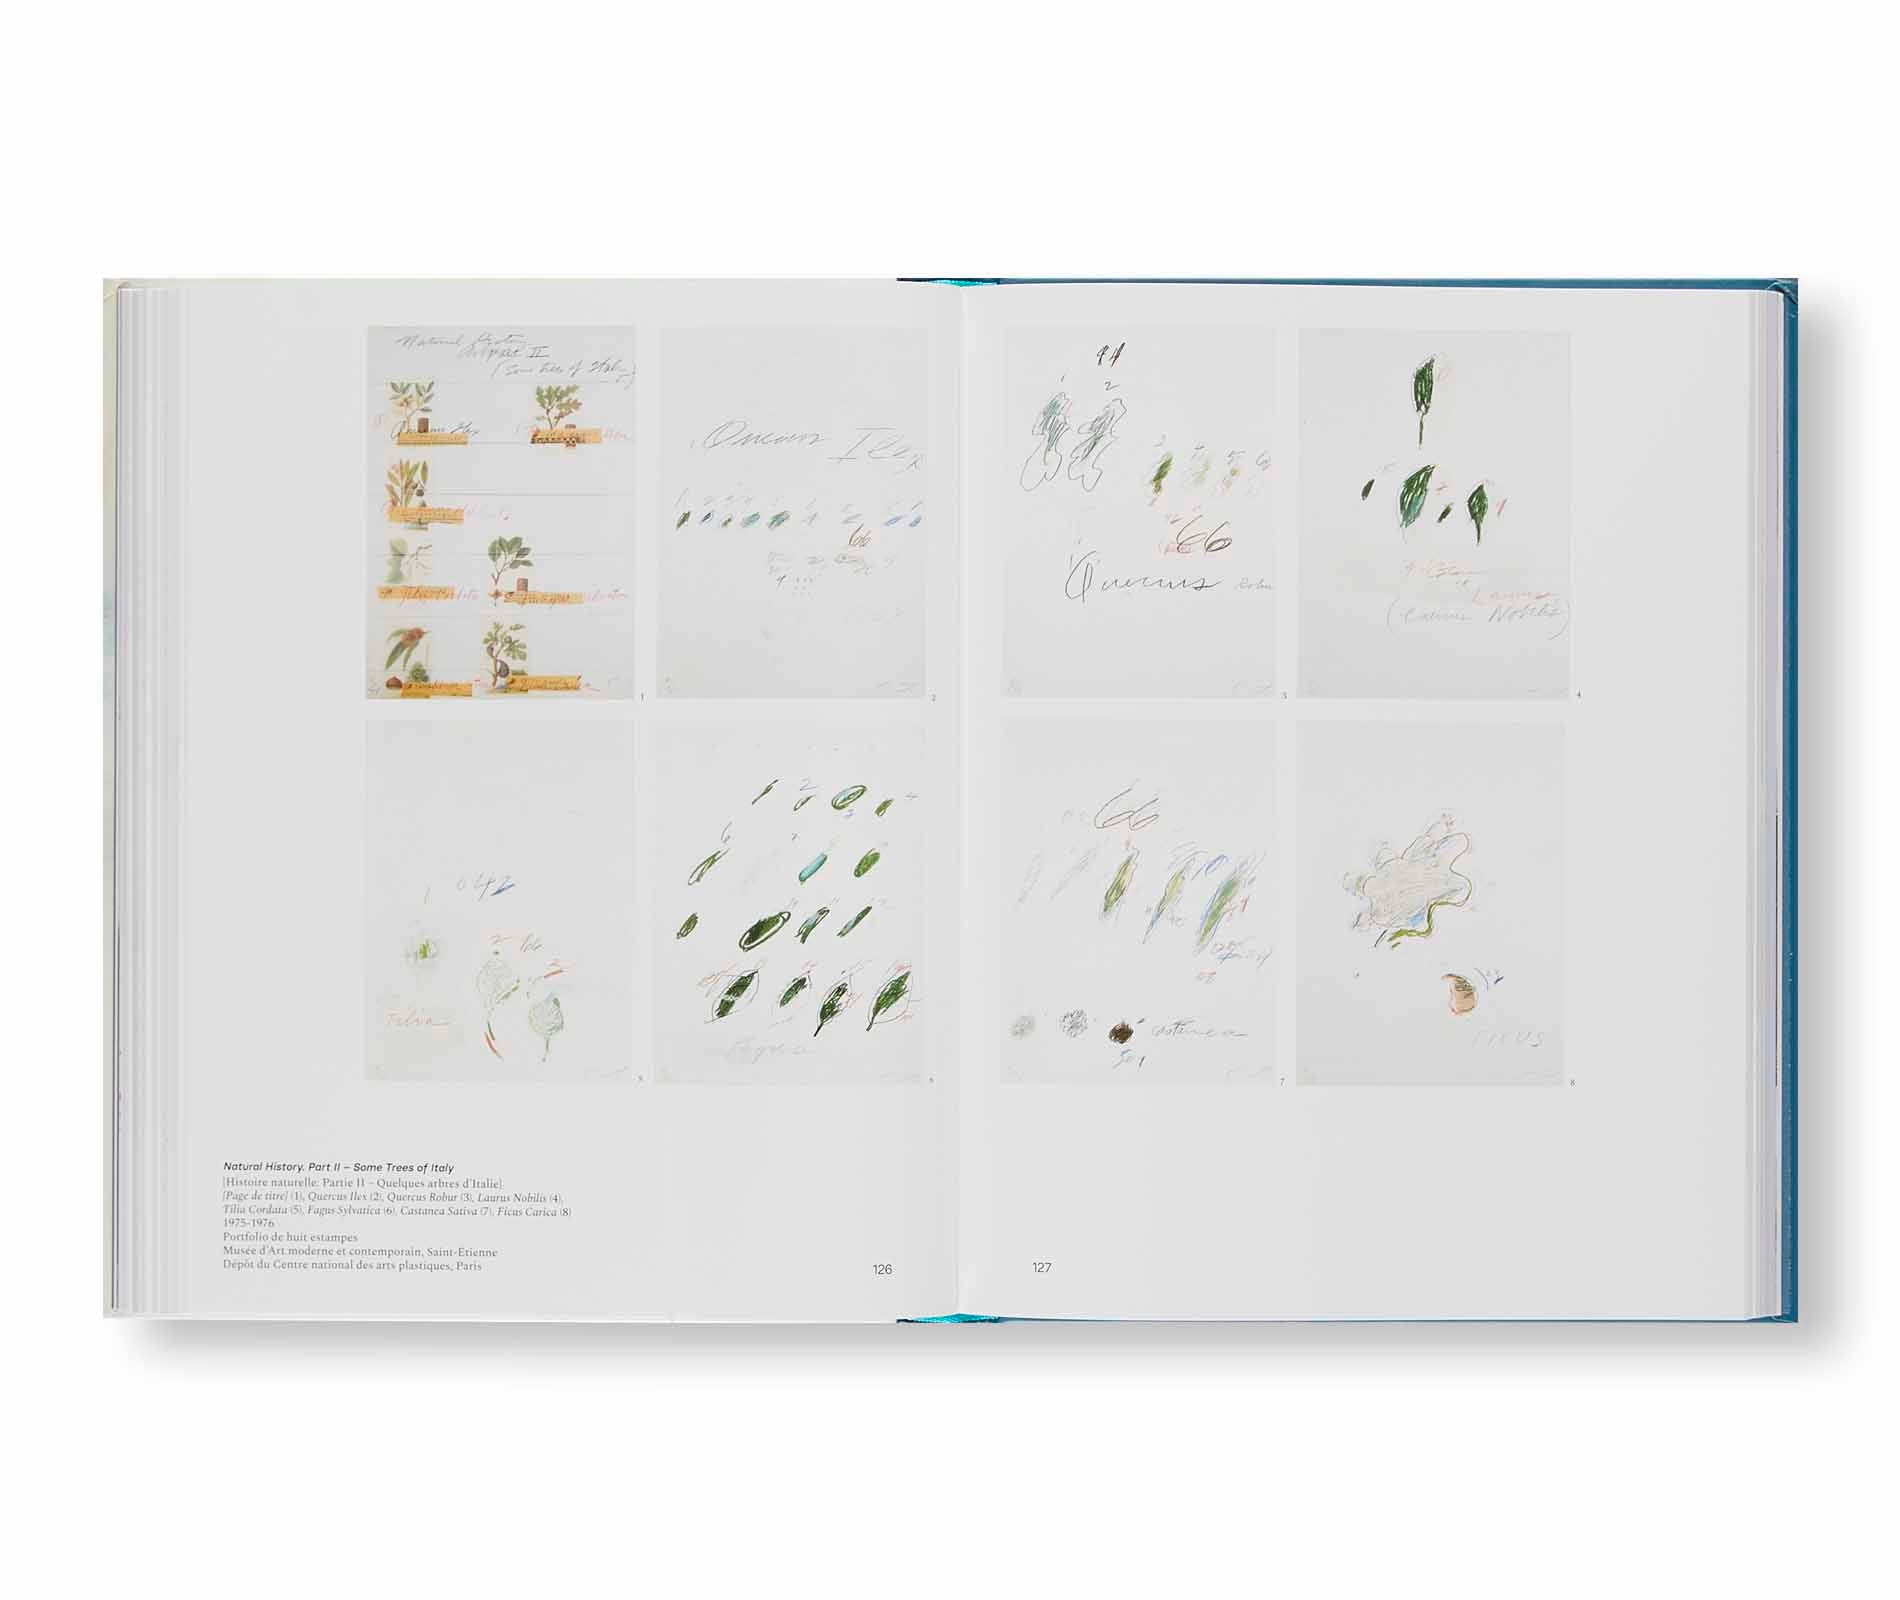 CY TWOMBLY. ŒUVRES GRAPHIQUES (1973-1977) by Cy Twombly